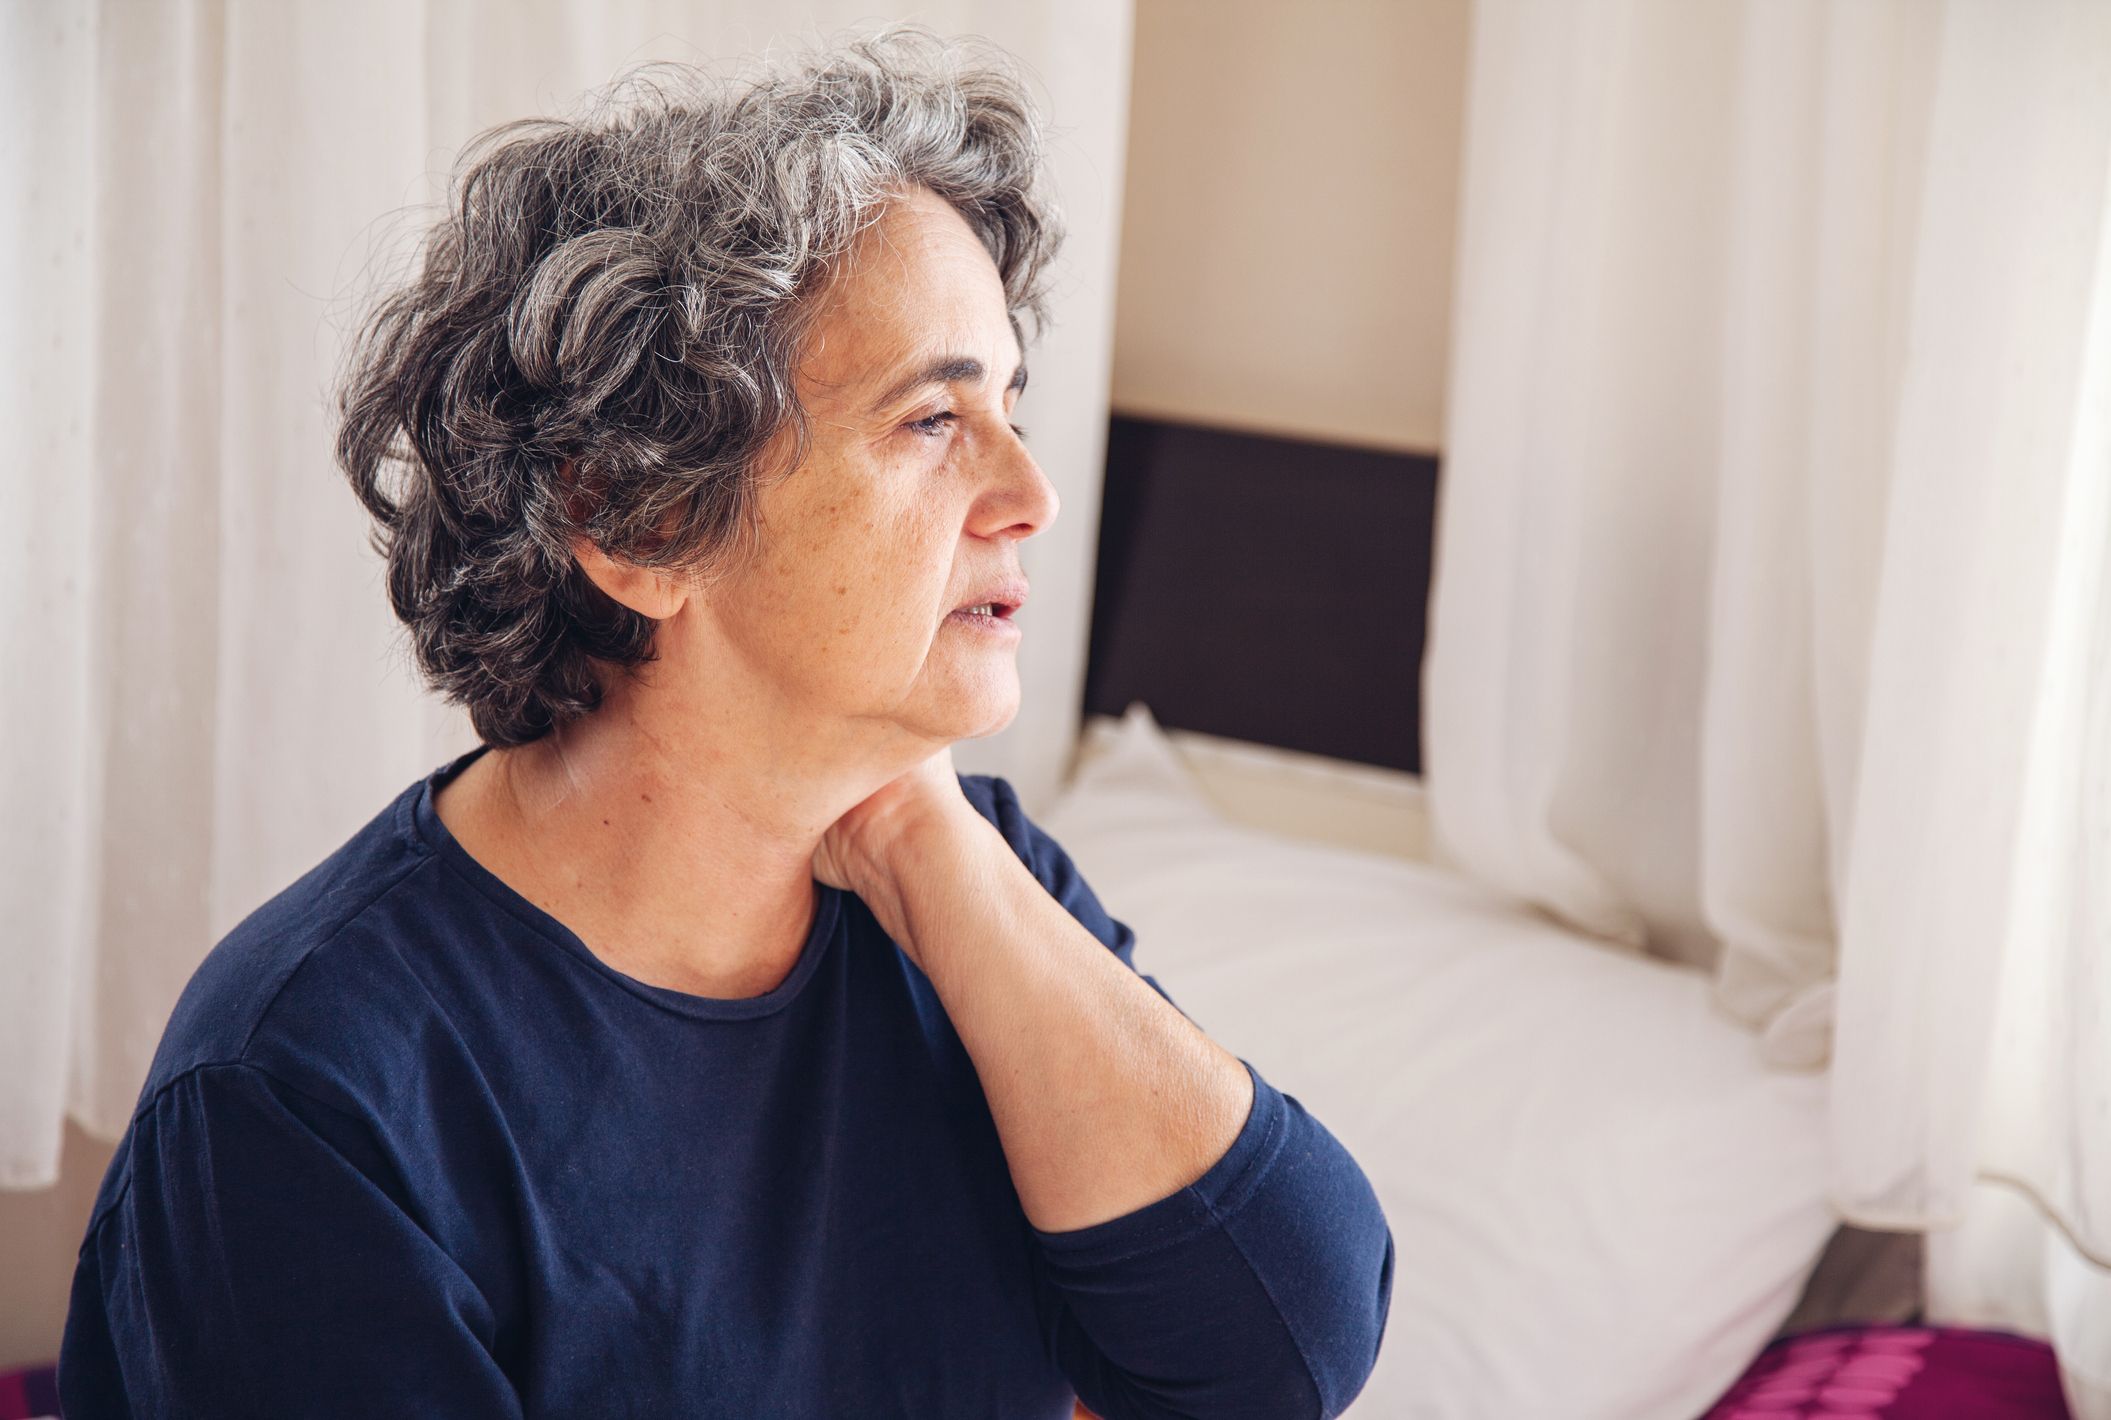 Menopausal Nights Sweats Linked to Impaired Thinking